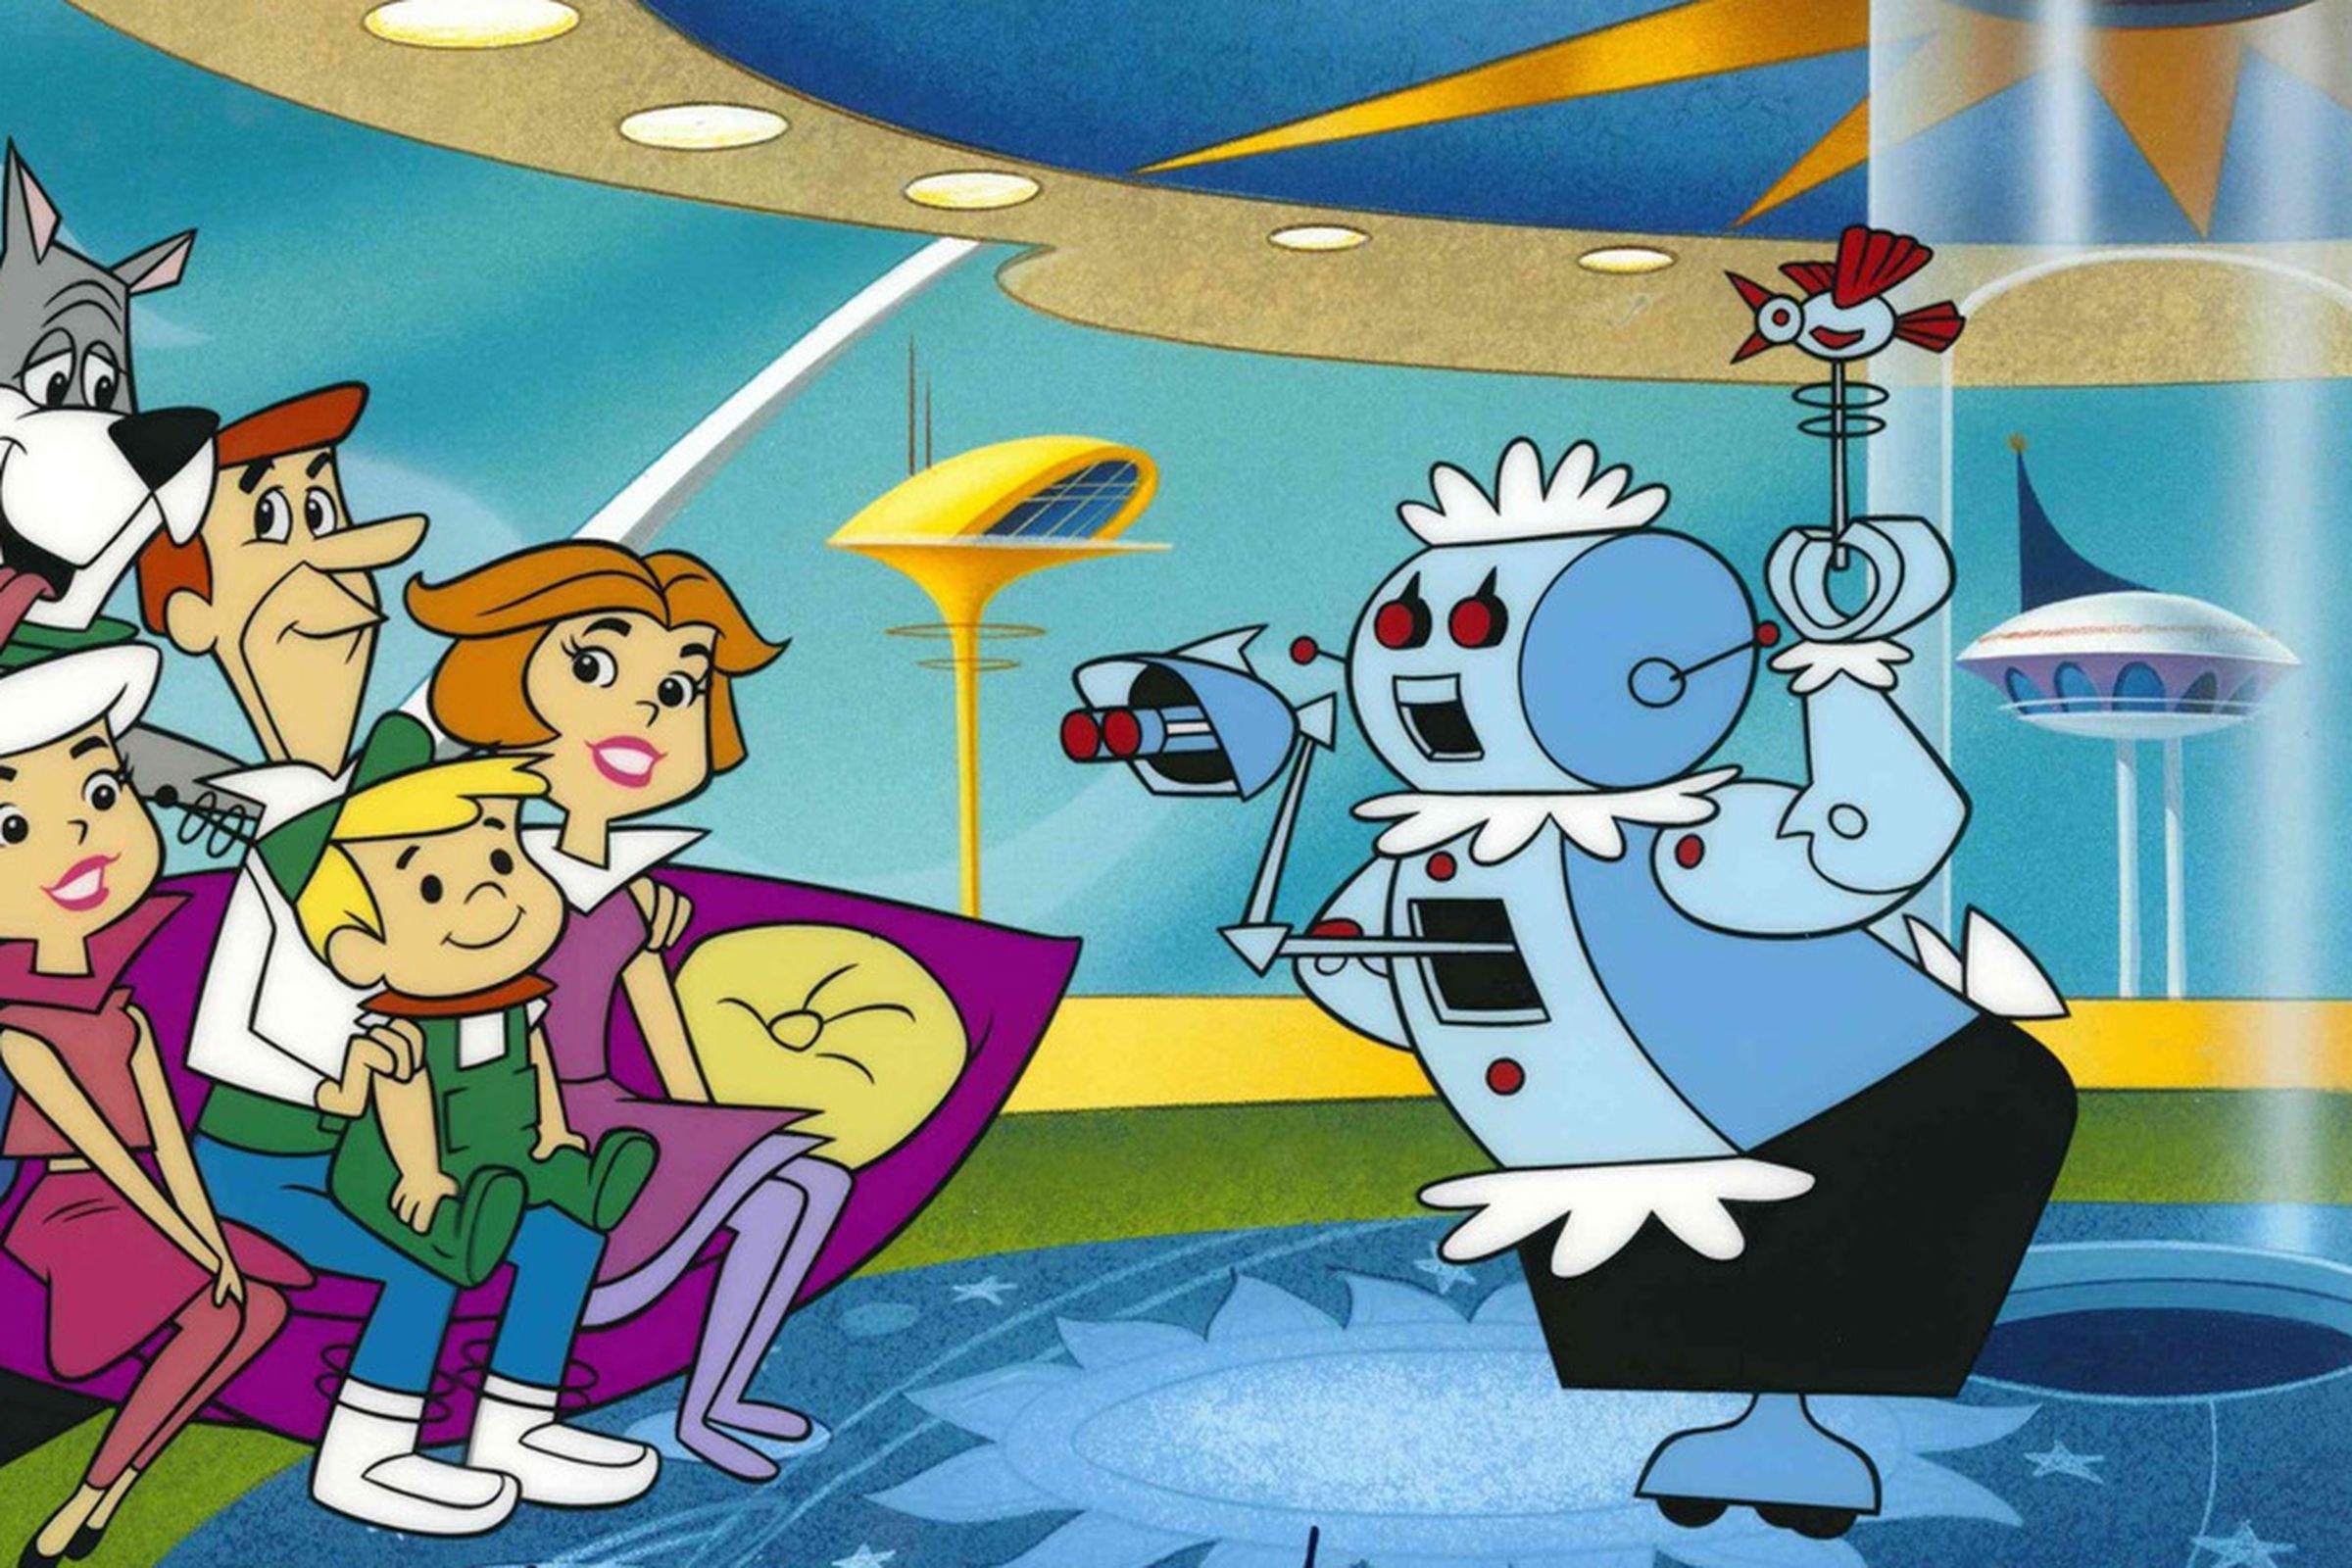 Cartoon image of a robot housekeeper with its family of humans.